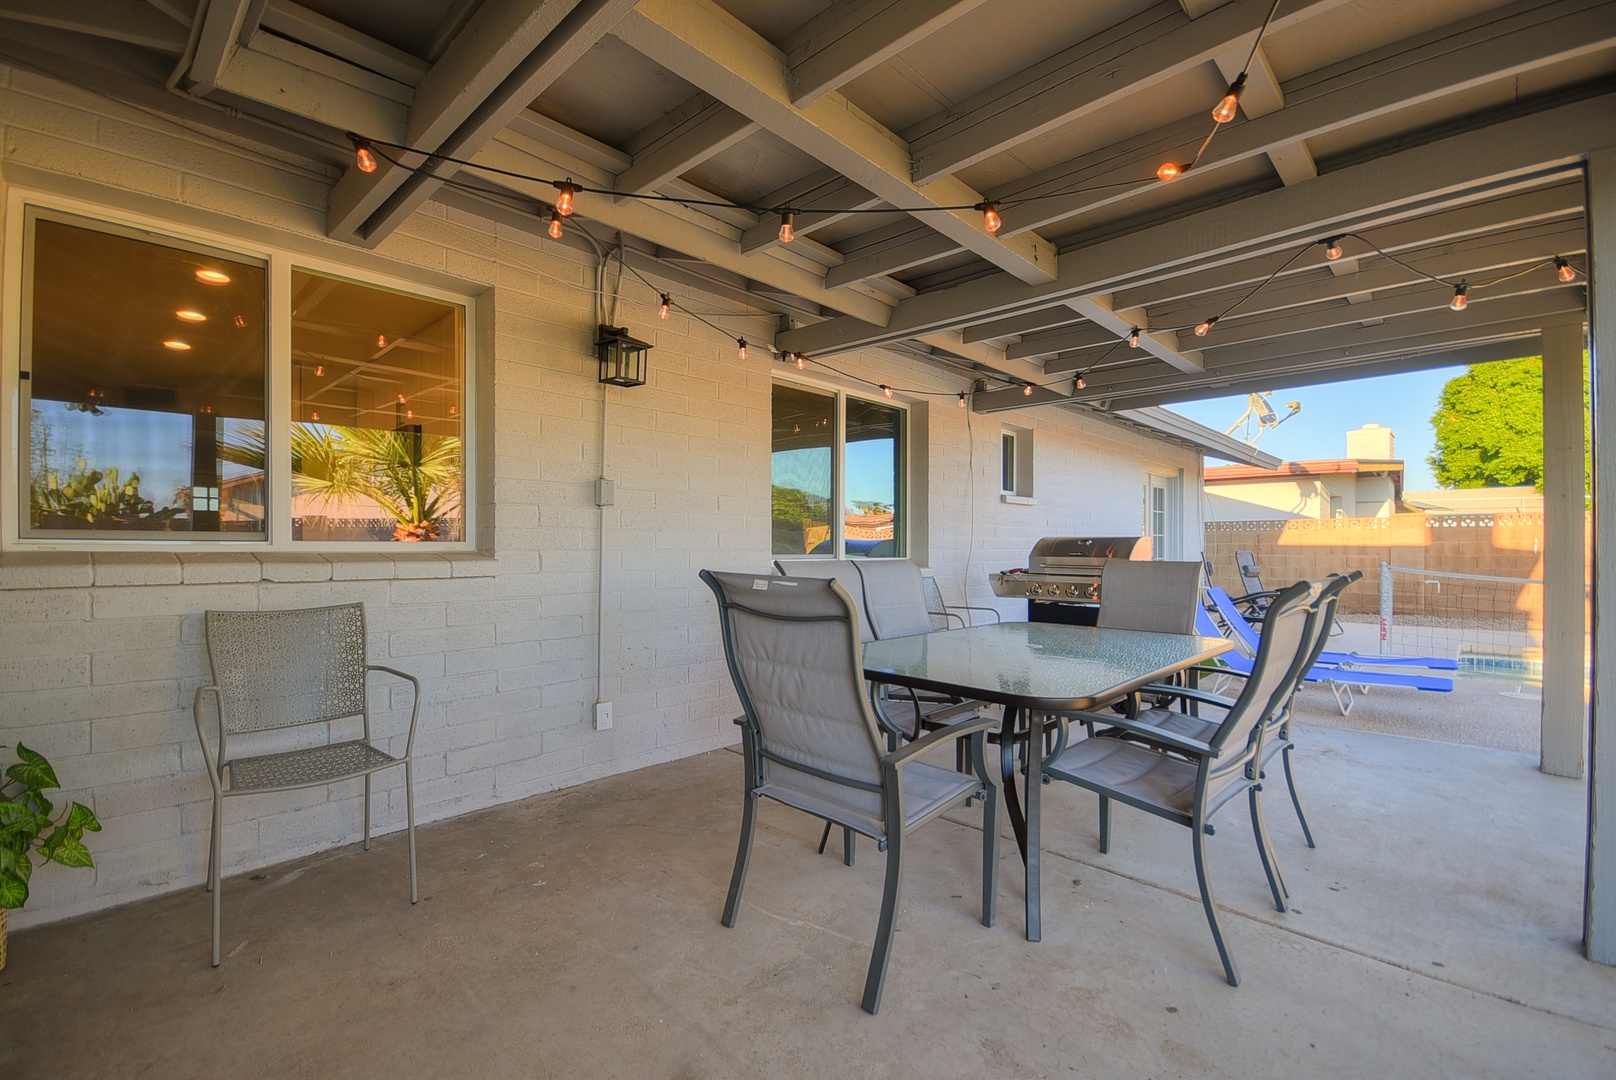 Covered patio area with outdoor dining table and bbq grill